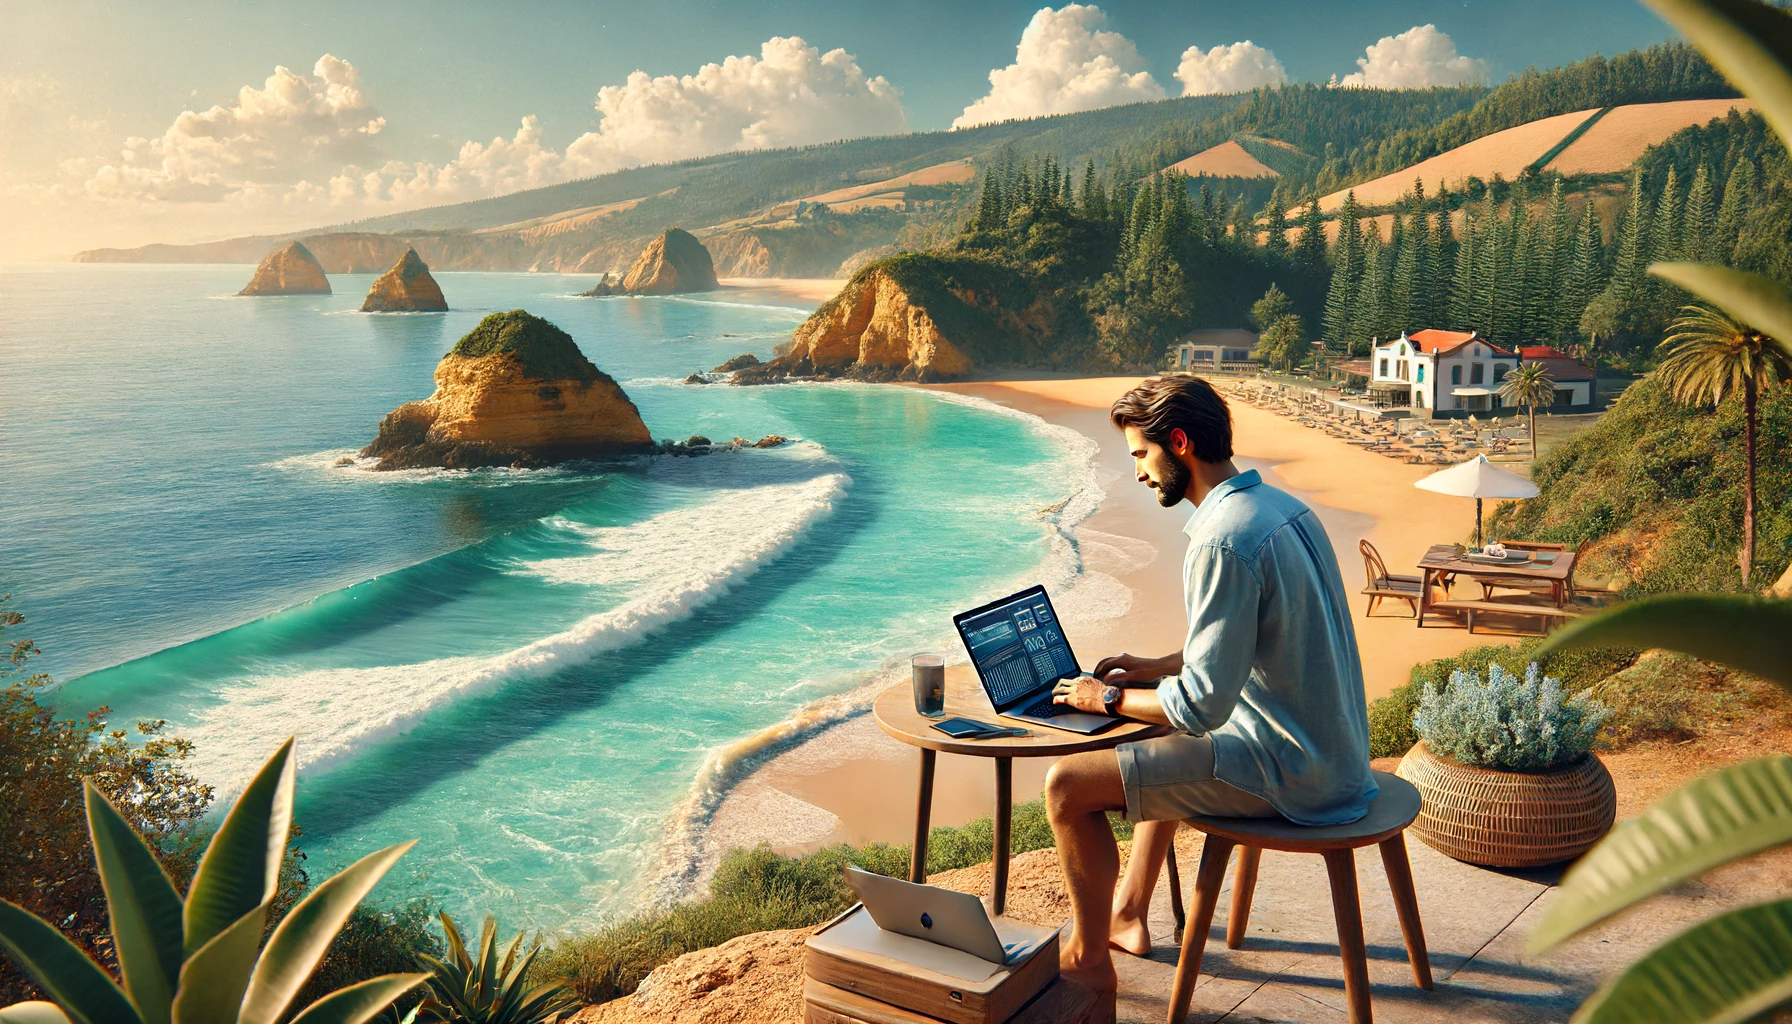 A digital nomad working on a laptop by a picturesque Portuguese coastline with vibrant blue waters, a sandy beach, and lush greenery in the background.